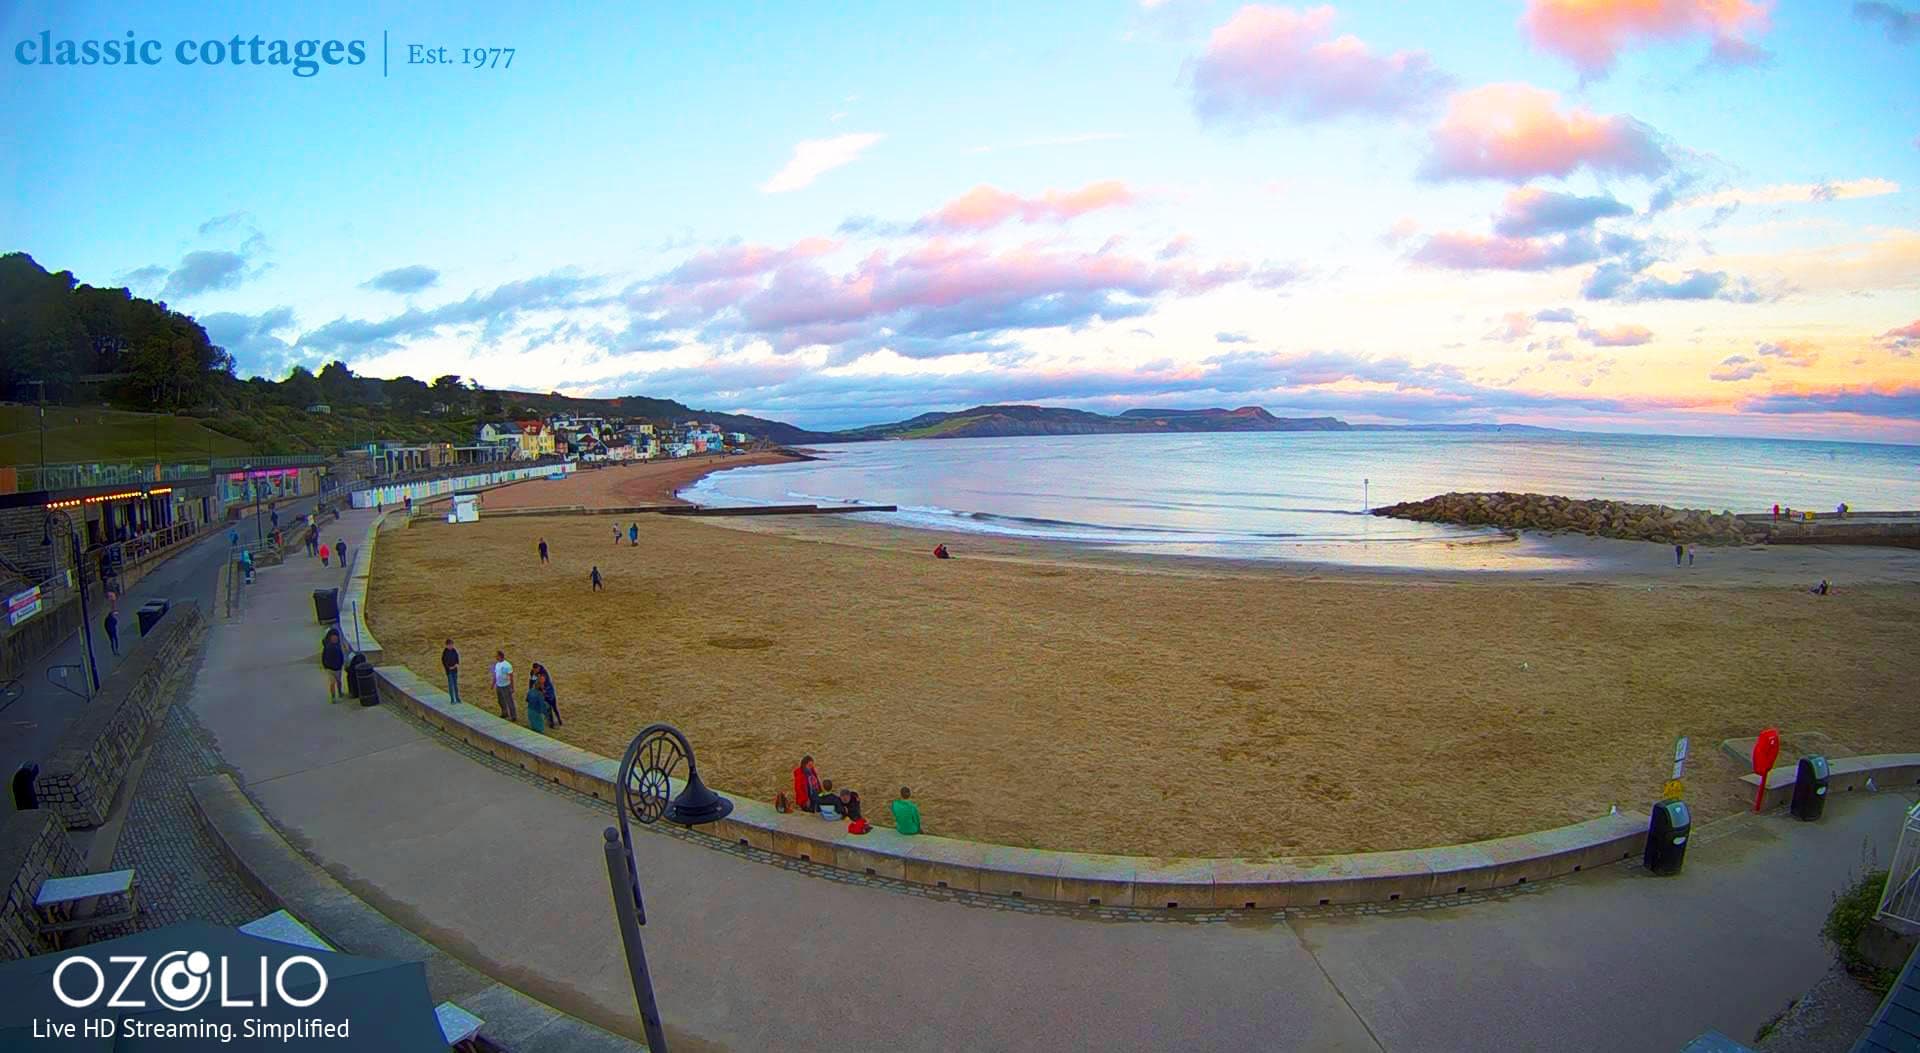 I love the Ozolio livestreams, like this one in Lyme Regis